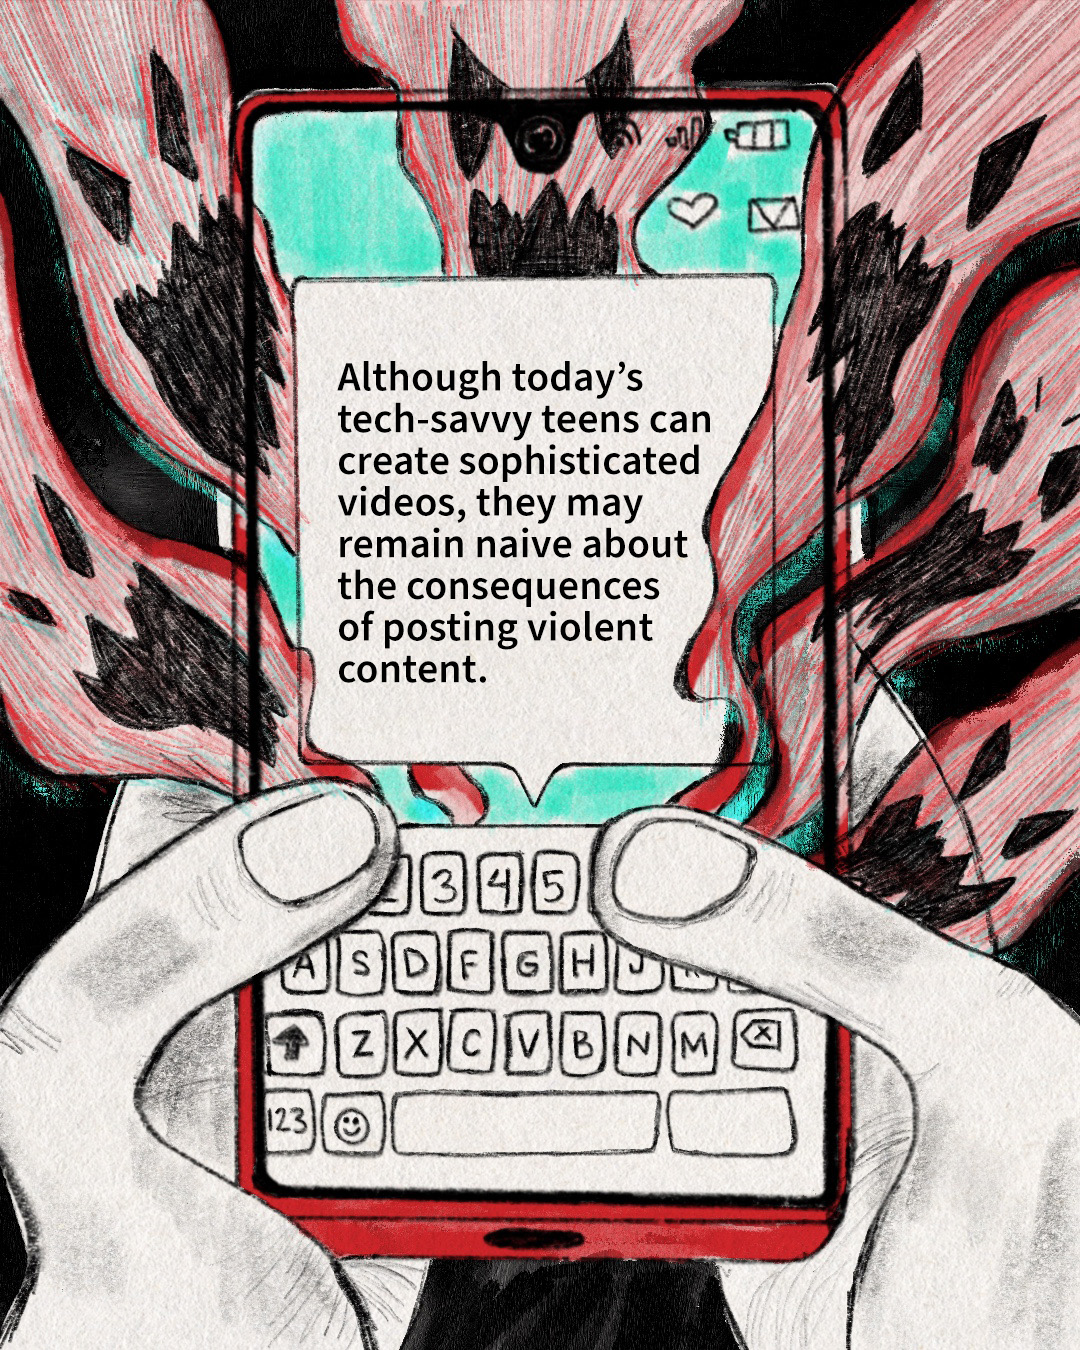 This illustration is of a teen in emotional distress. With two hands, a red smartphone is held in a position that implies a person is texting. Angry ghosts are popping out from behind the text message. The text message reads: “Although today’s tech-savvy teens can create sophisticated videos, they may remain naive about the consequences of posting violent content.”